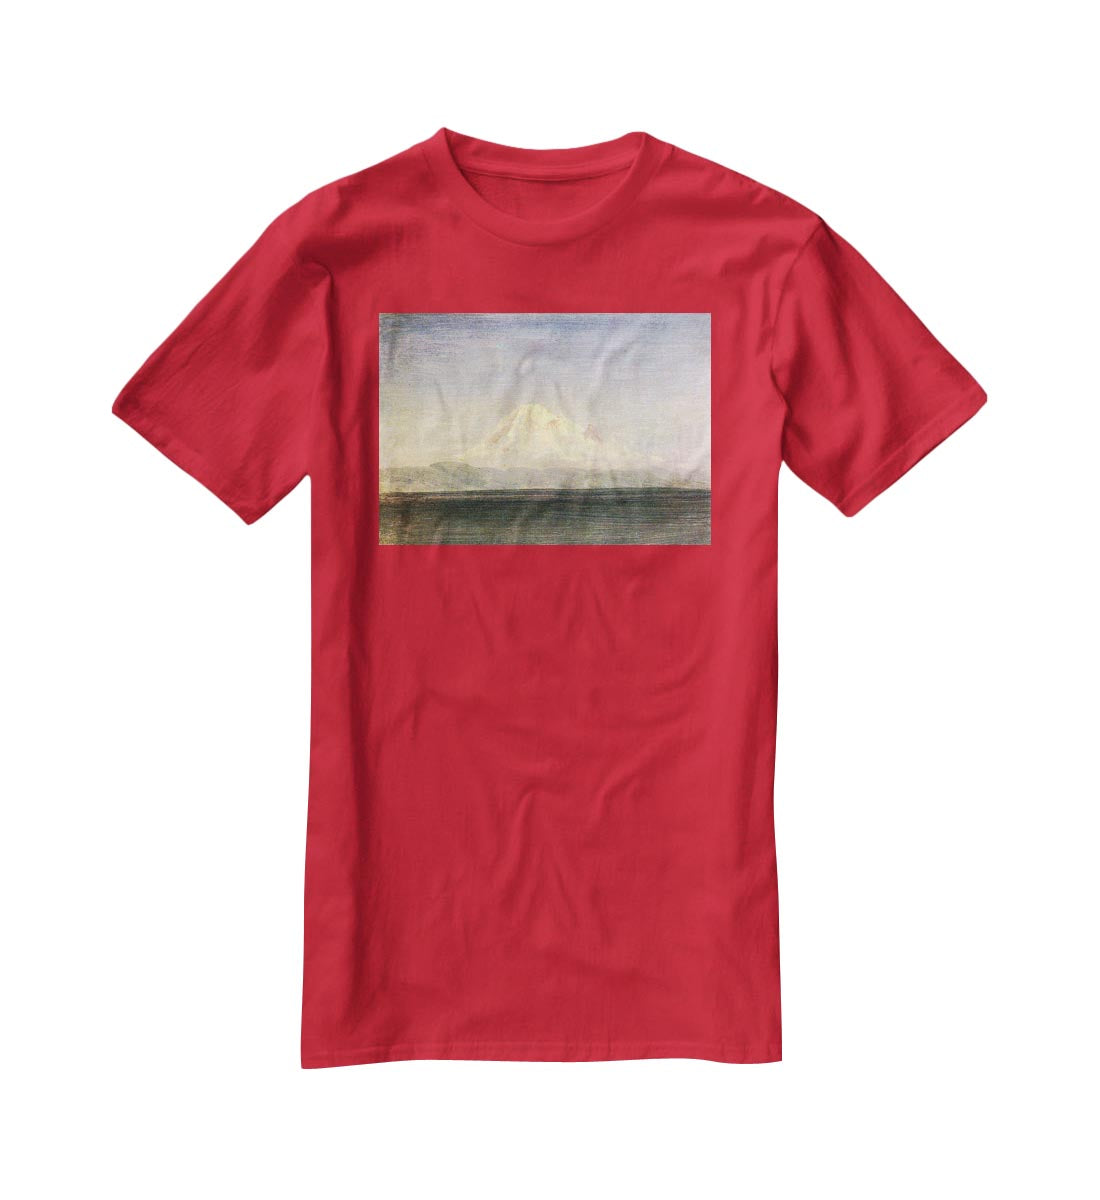 Snowy Mountains in the Pacific Northwest by Bierstadt T-Shirt - Canvas Art Rocks - 4